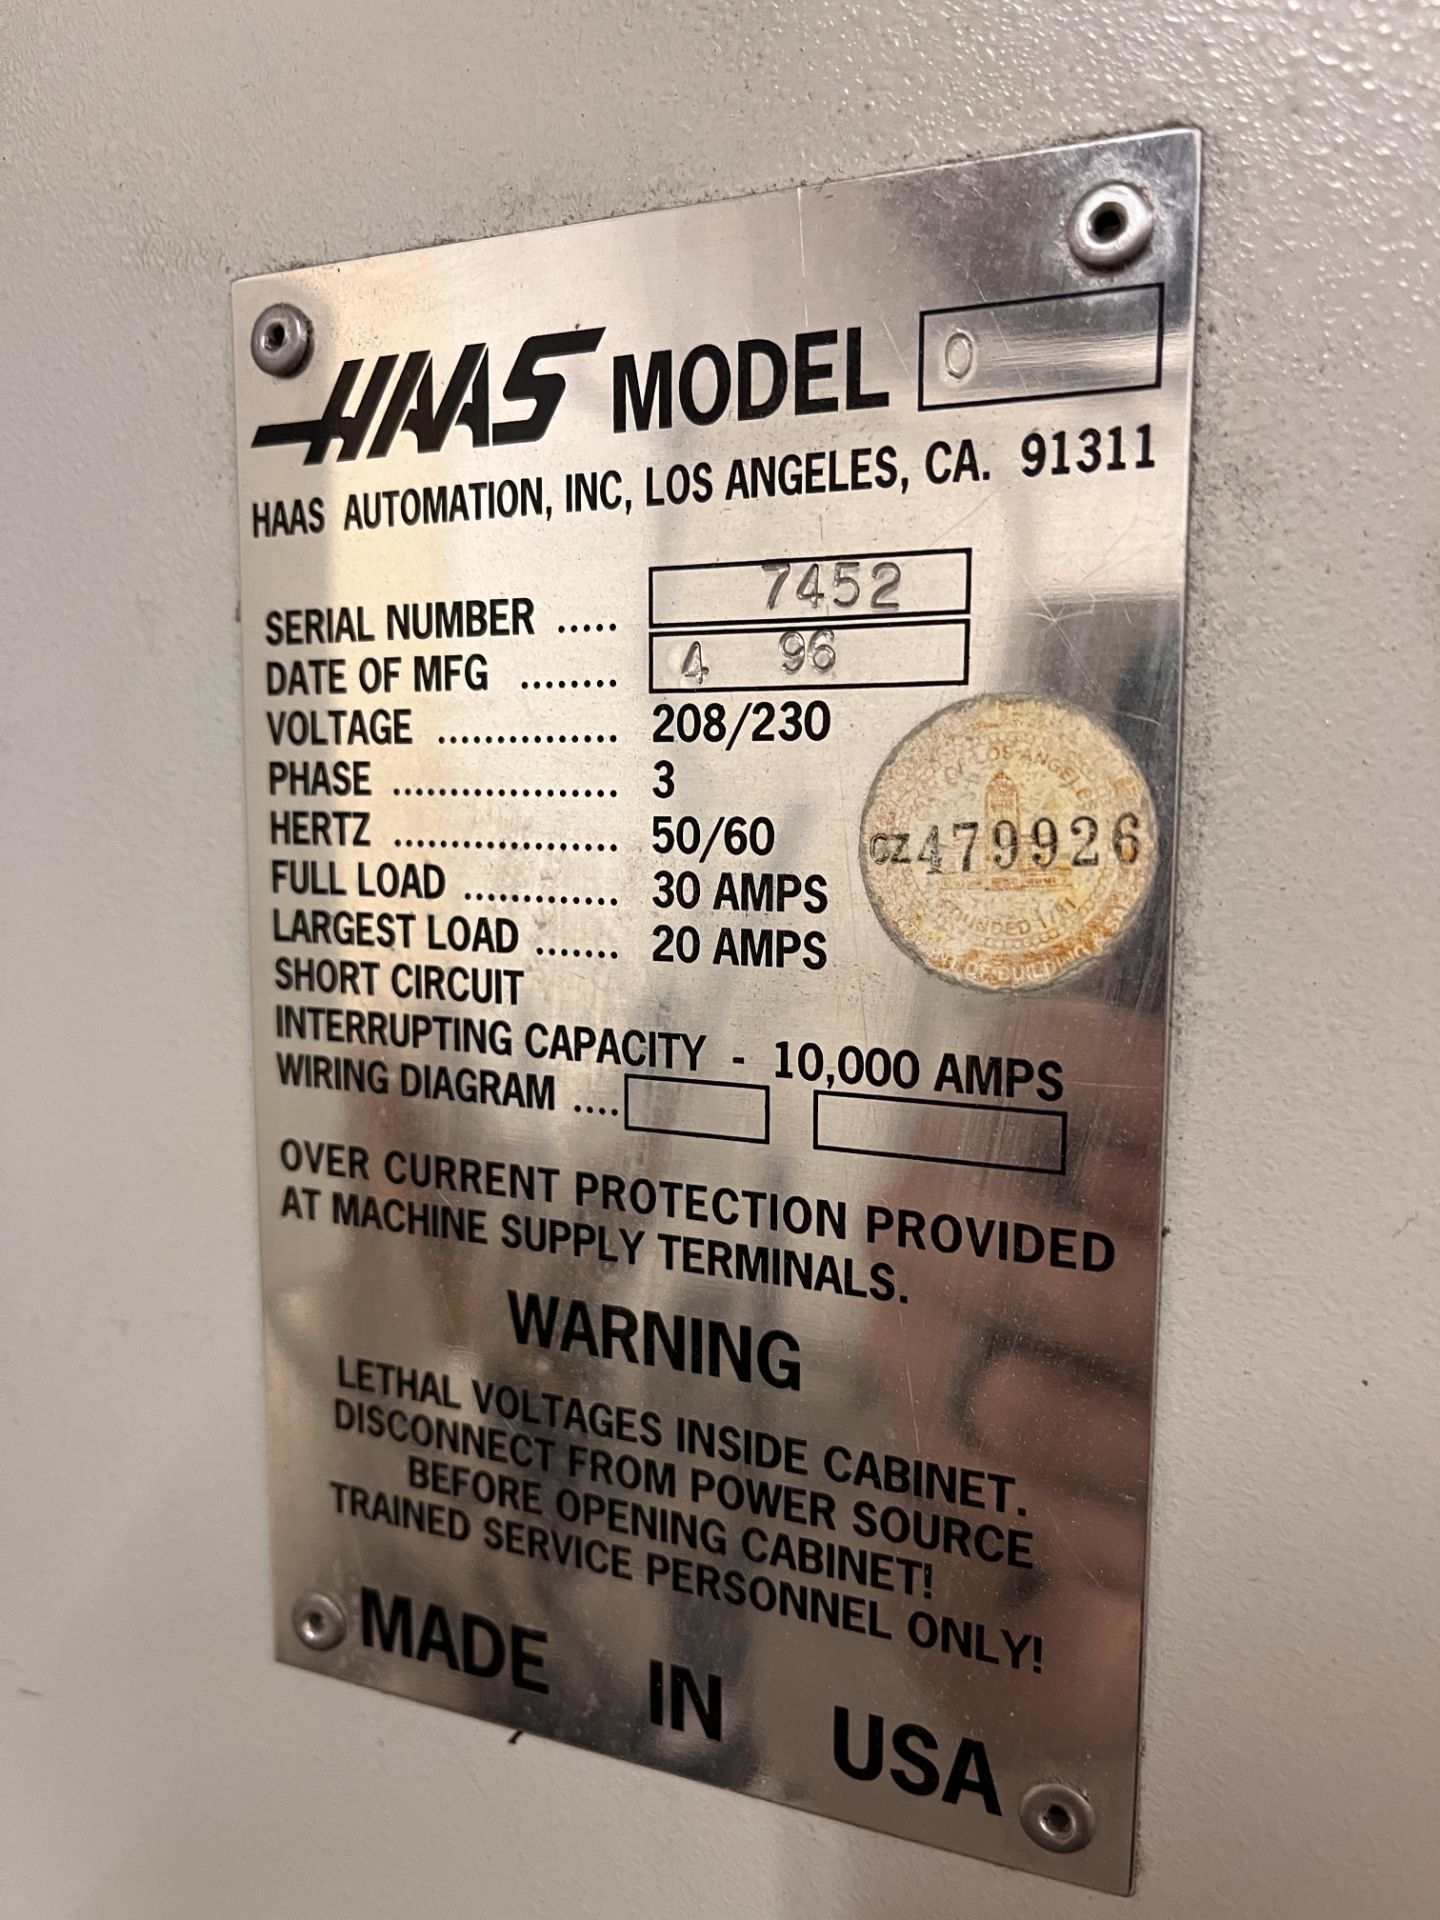 1996 Haas VFO CNC Vertical Machining Center - Image 10 of 13